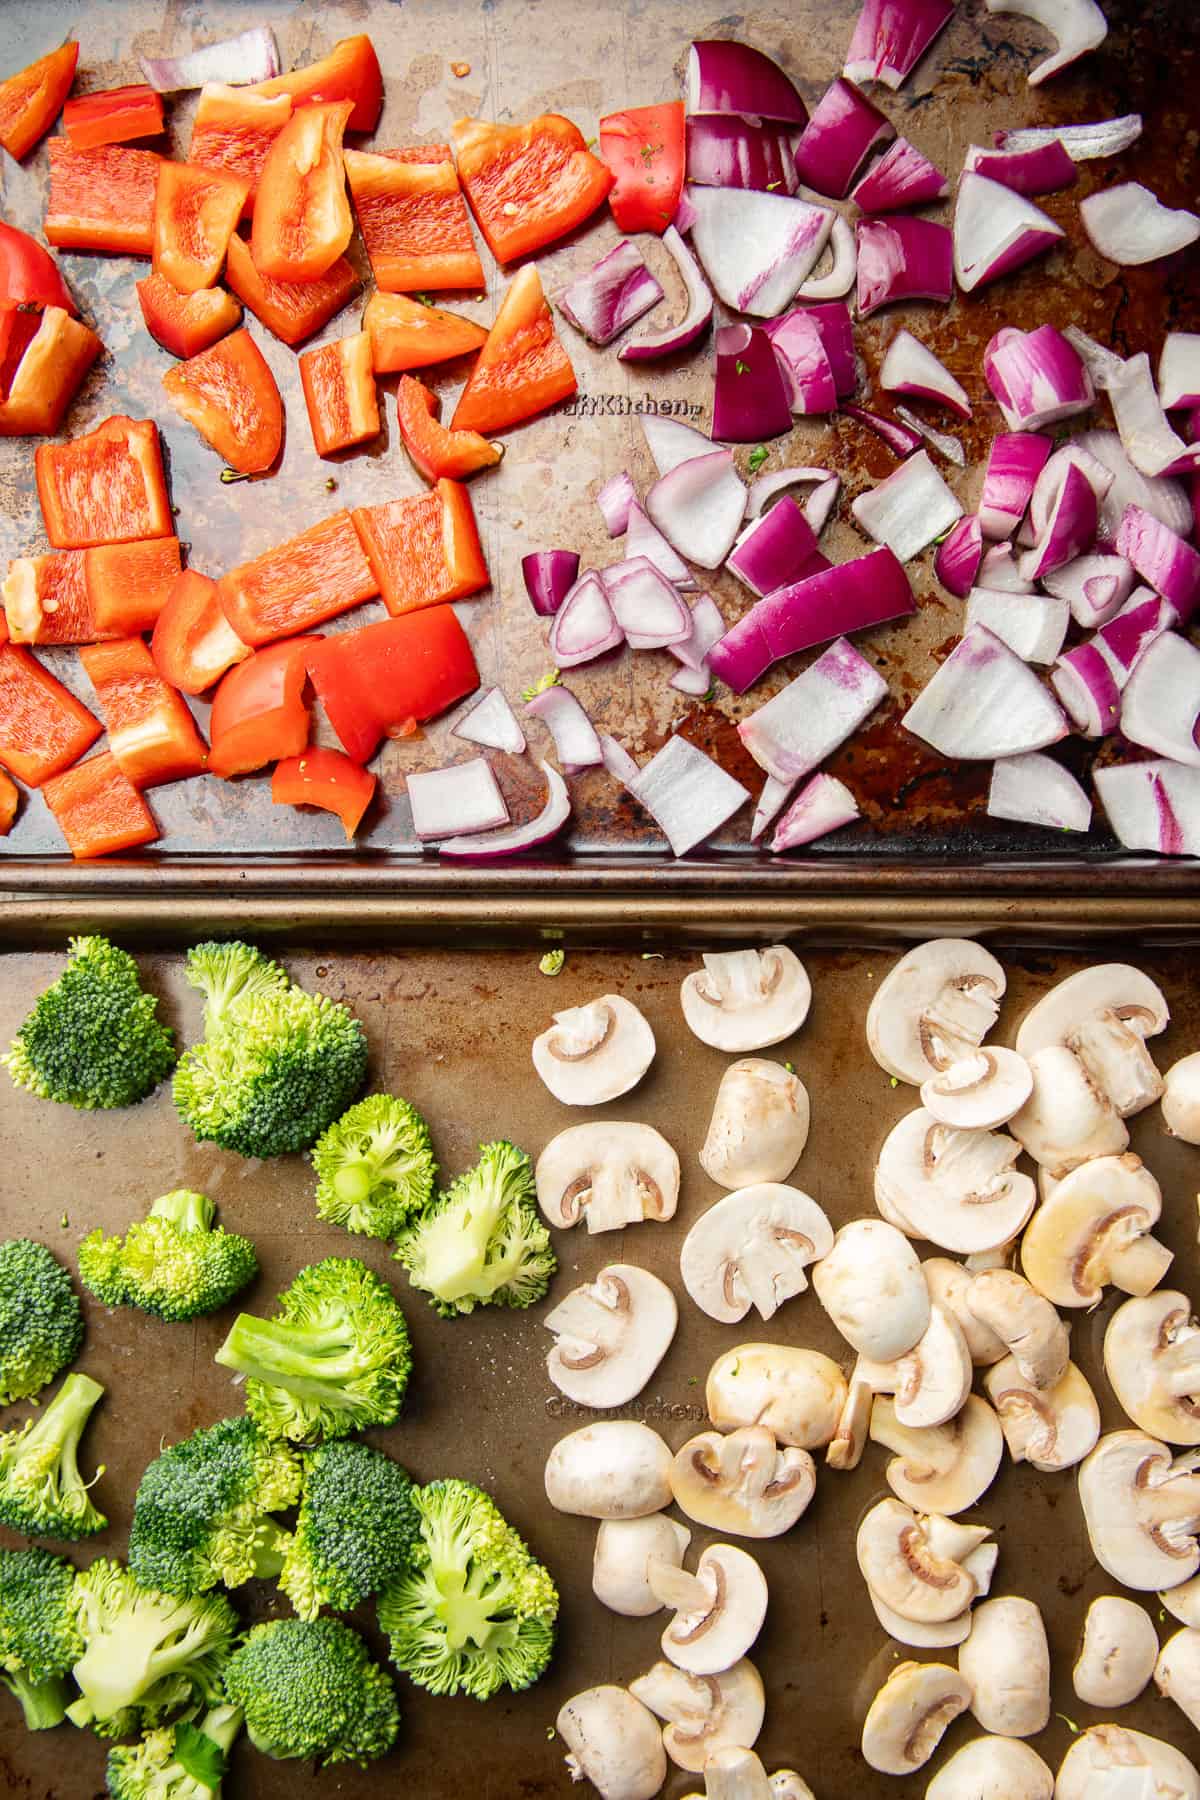 Chopped red pepper, red onion, broccoli, and sliced mushrooms on two baking sheets.